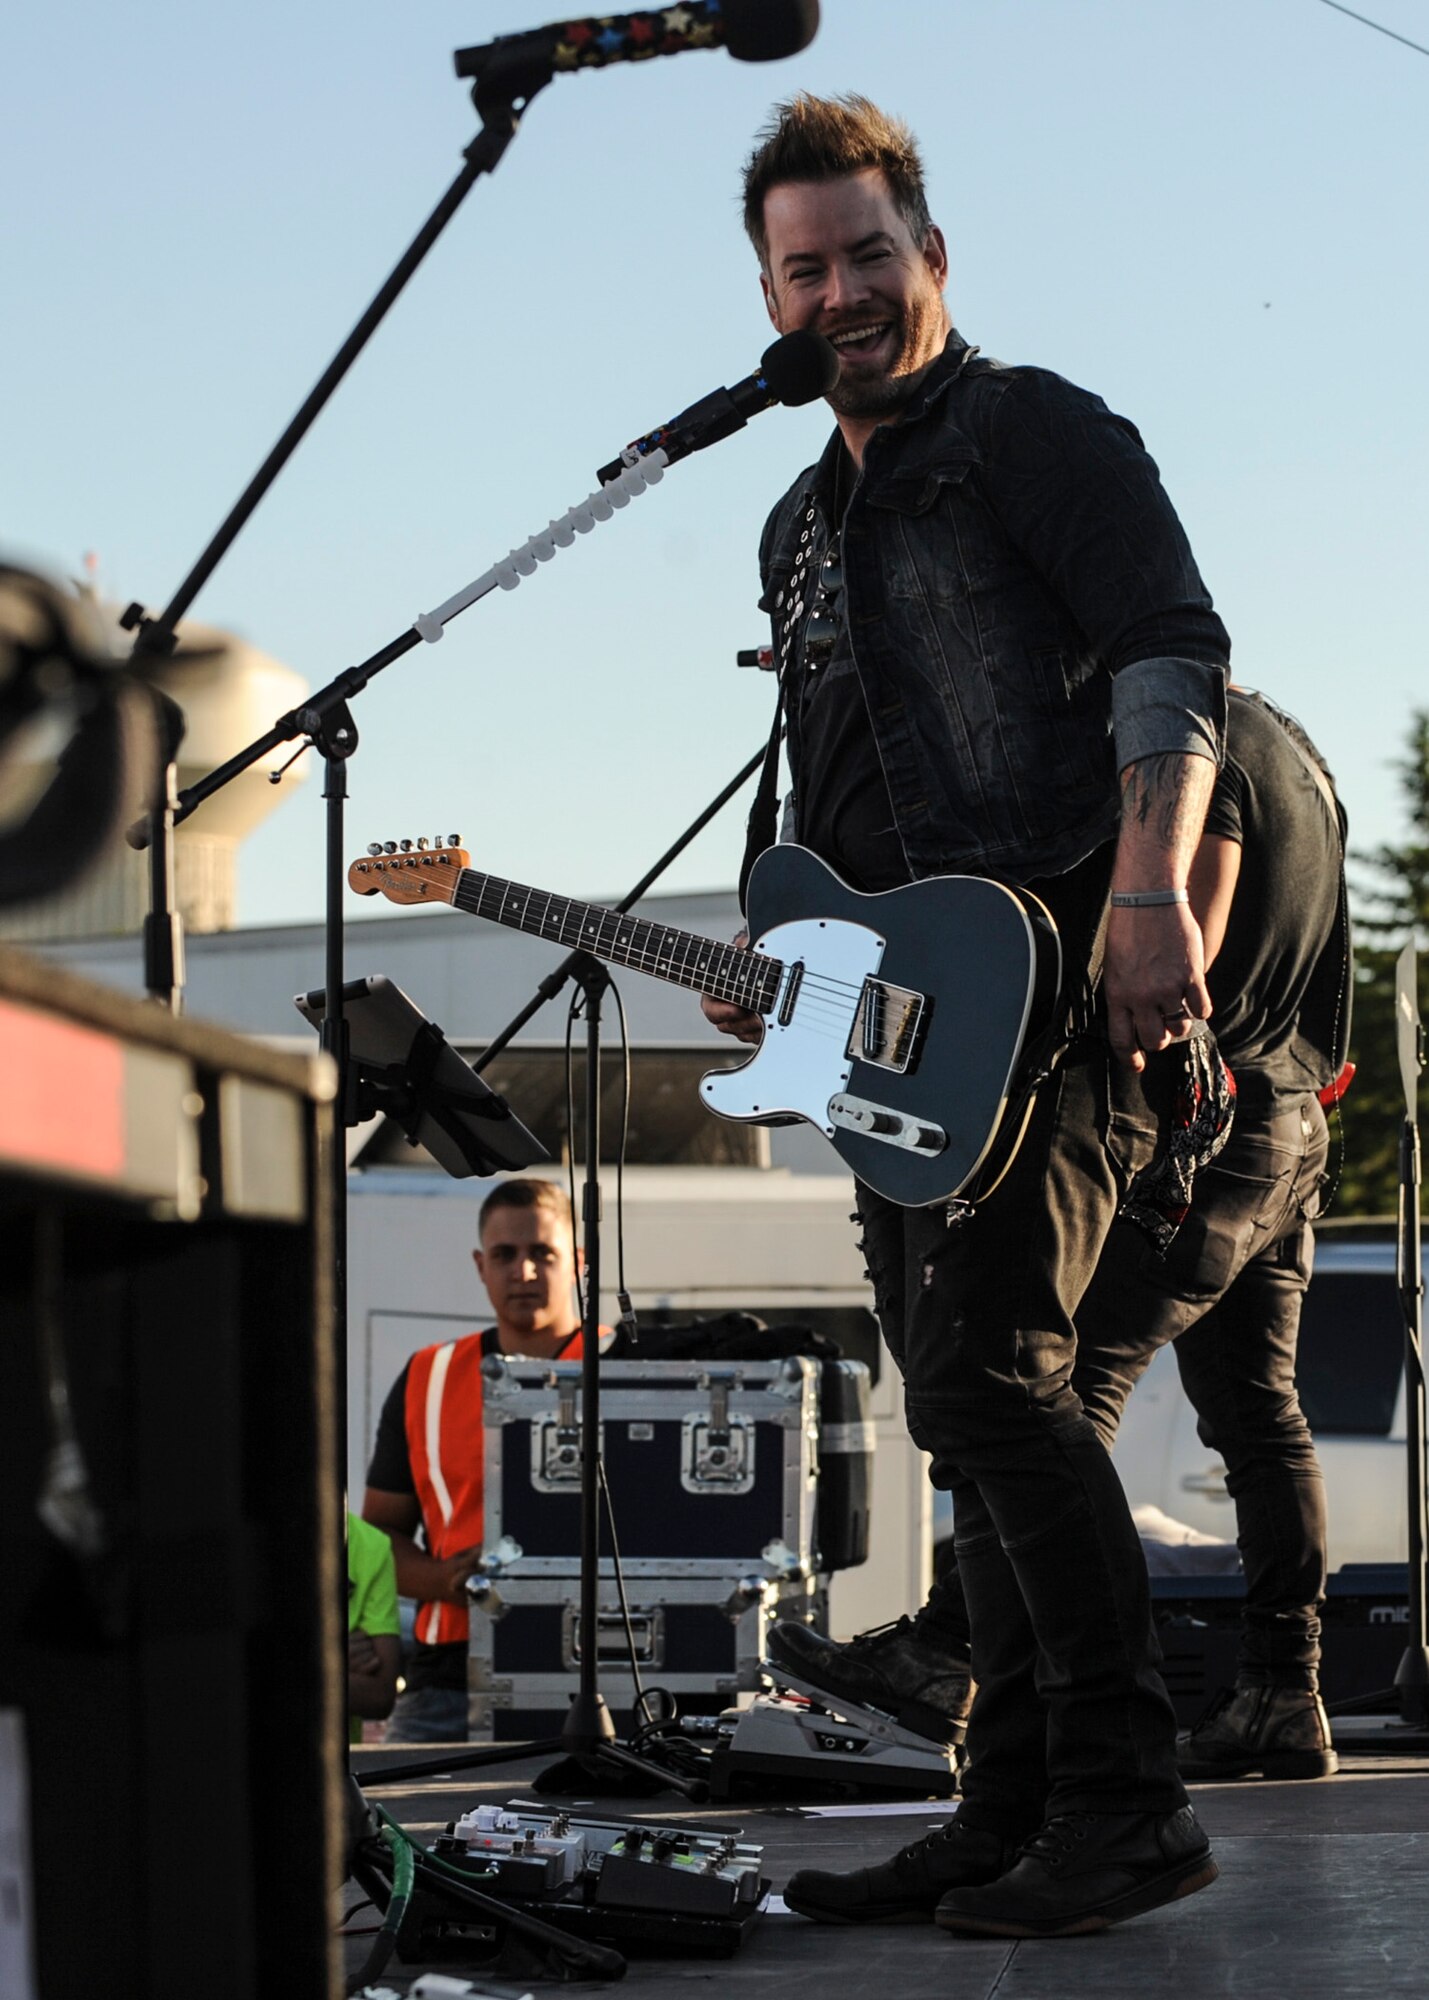 David Cook, winner of season seven of “American Idol,” addresses the audience during a free concert outside the Dakota’s Club at Ellsworth Air Force Base, S.D., June 3, 2016. Cook has performed for U.S. military personnel in Bahrain, Iran, Iraq, Kuwait, the Persian Gulf and across Europe. (U.S. Air Force photo by Airman 1st Class Denise M. Nevins/Released)